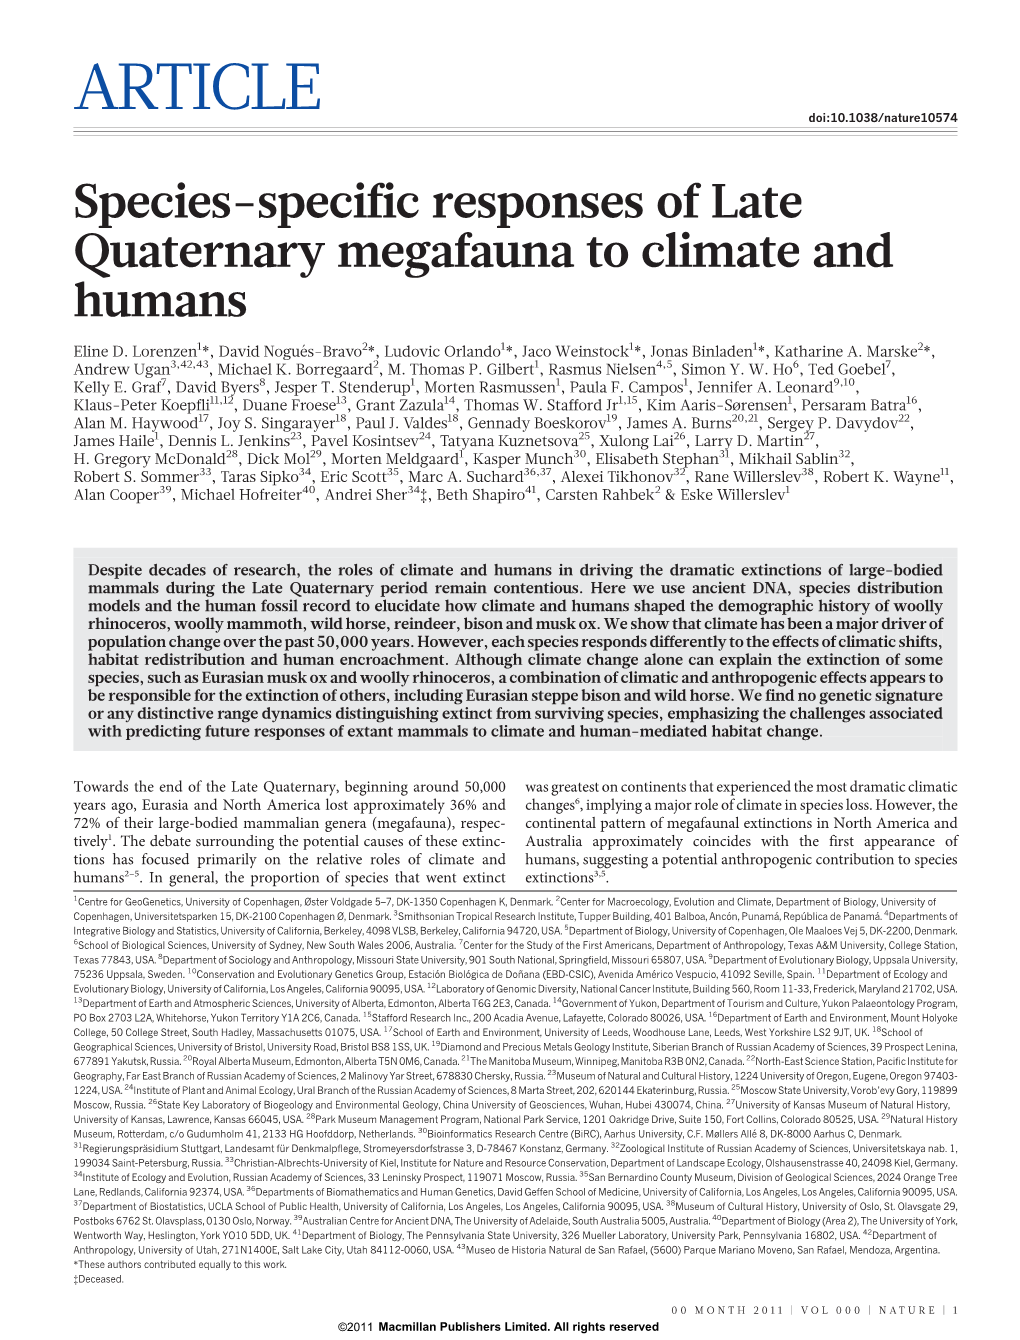 Species-Specific Responses of Late Quaternary Megafauna to Climate and Humans